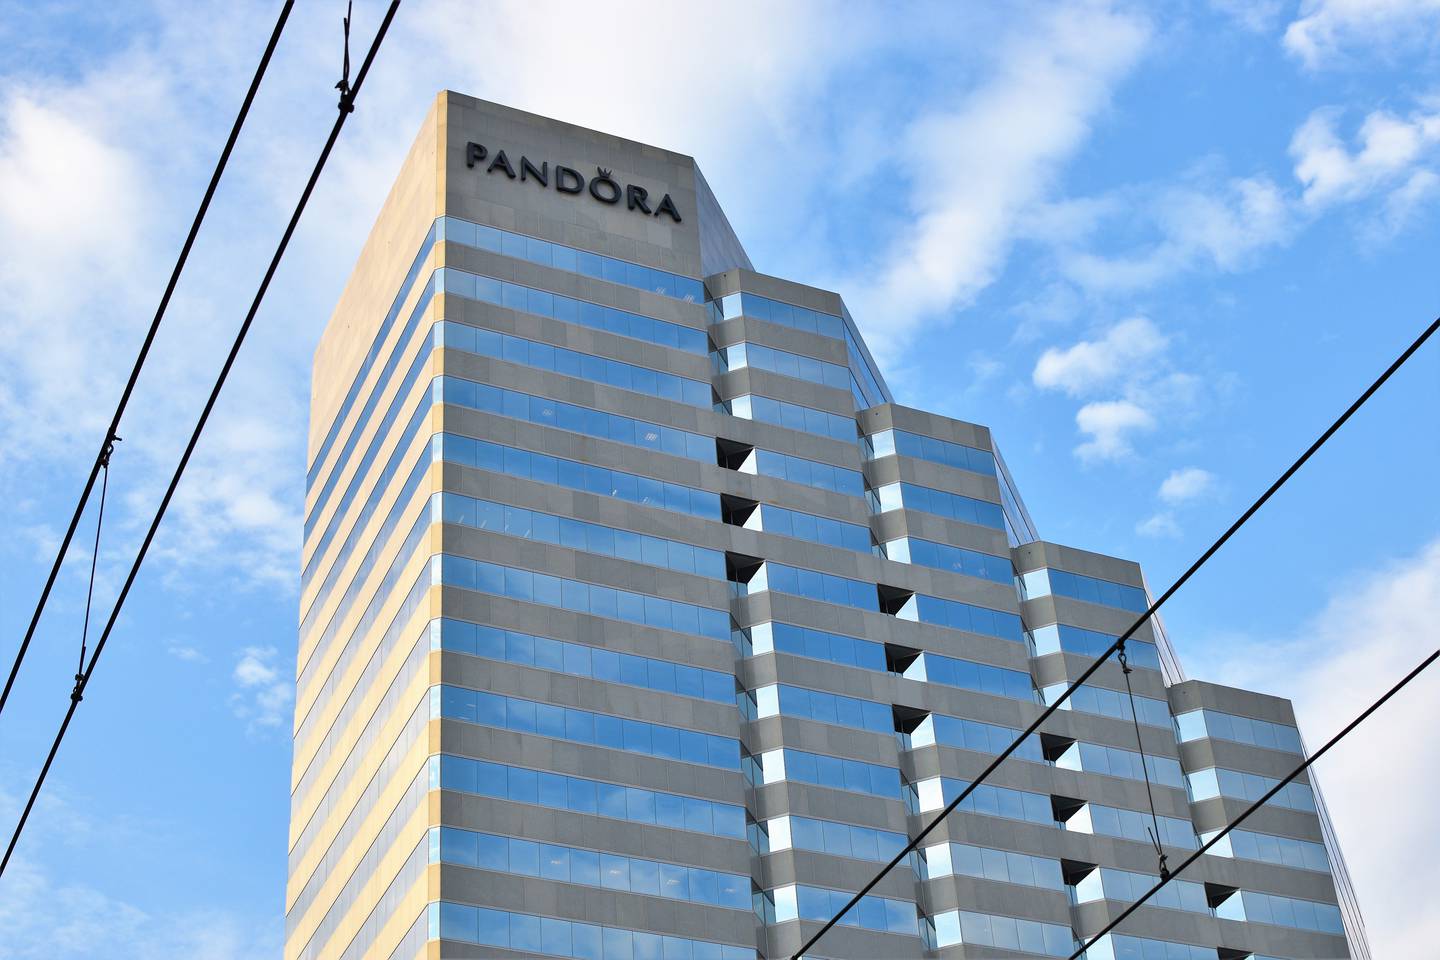 Pandora a jewelry chain has its corporate headquarter building in Baltimore, Md.